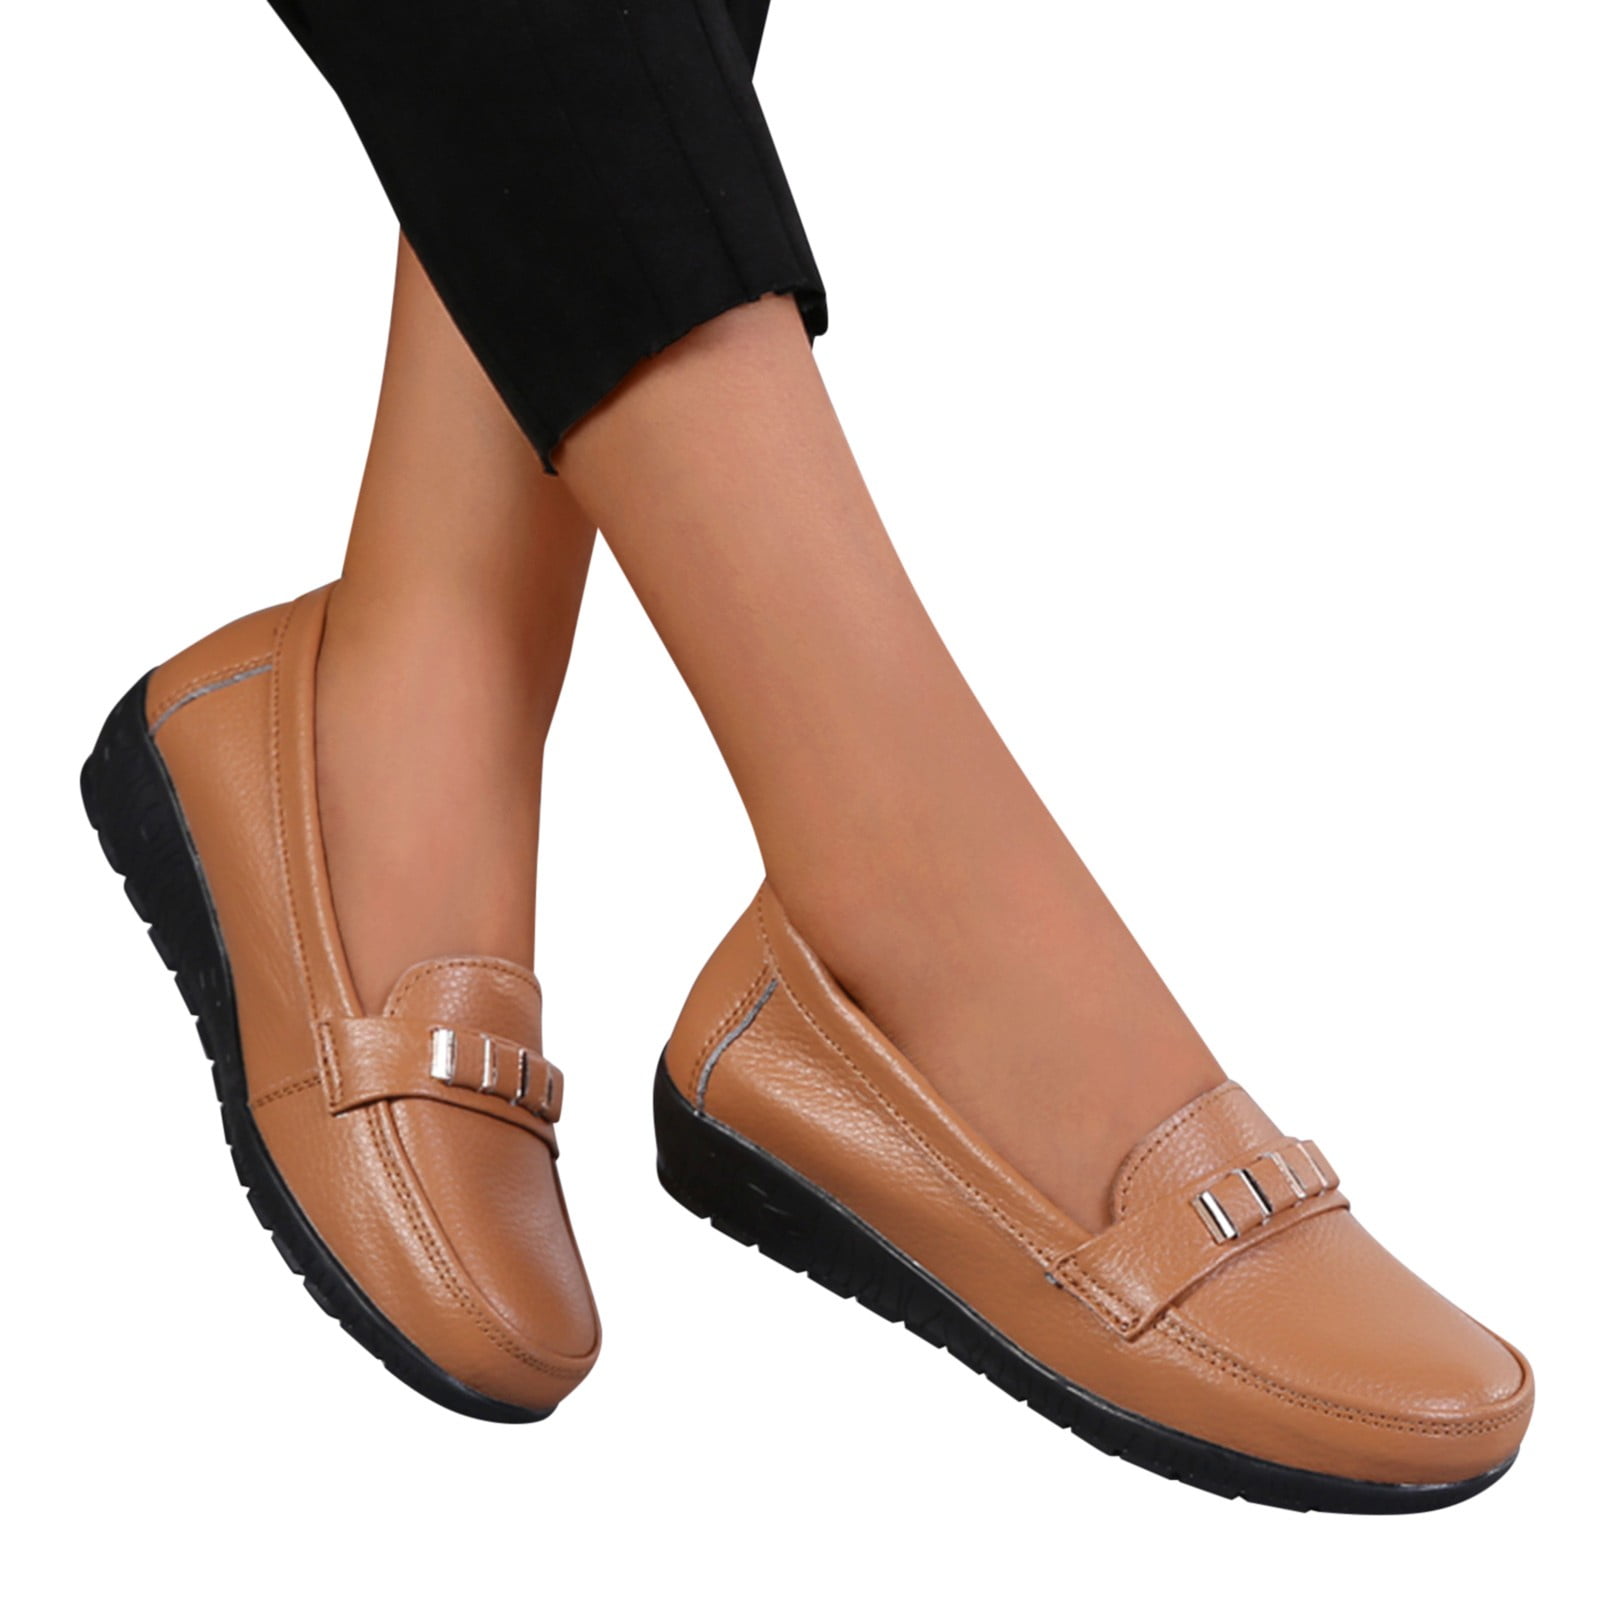 Vedolay Flats Loafers Women's Soft Comfortable Loafers Round Head Non-Slip Leisure Shoes,Brown 7 - Walmart.com